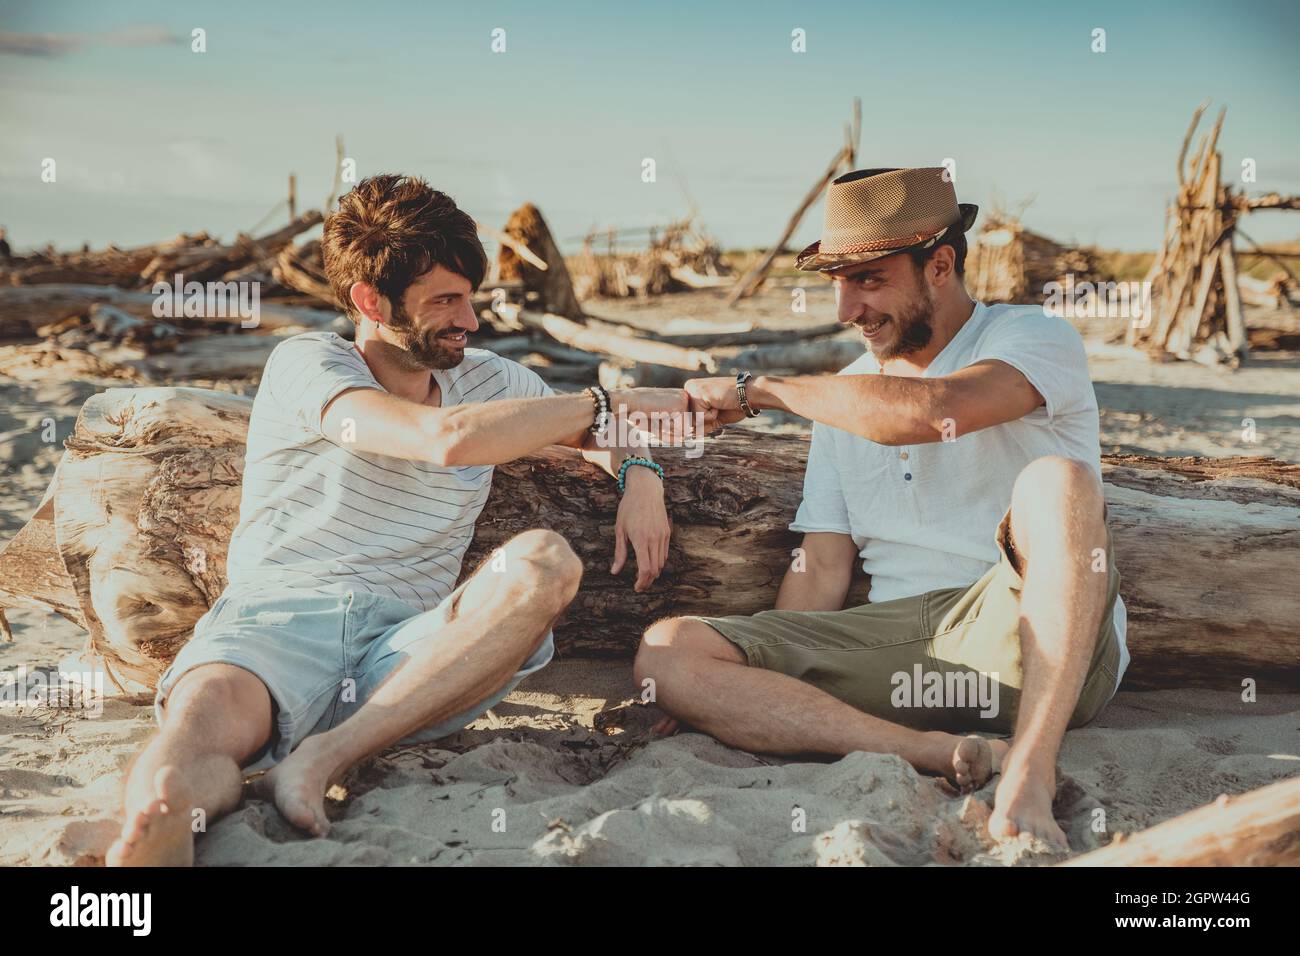 Two boys sitting on the beach greeting each other with their fists. Young people pounding their fists to greet each other Stock Photo